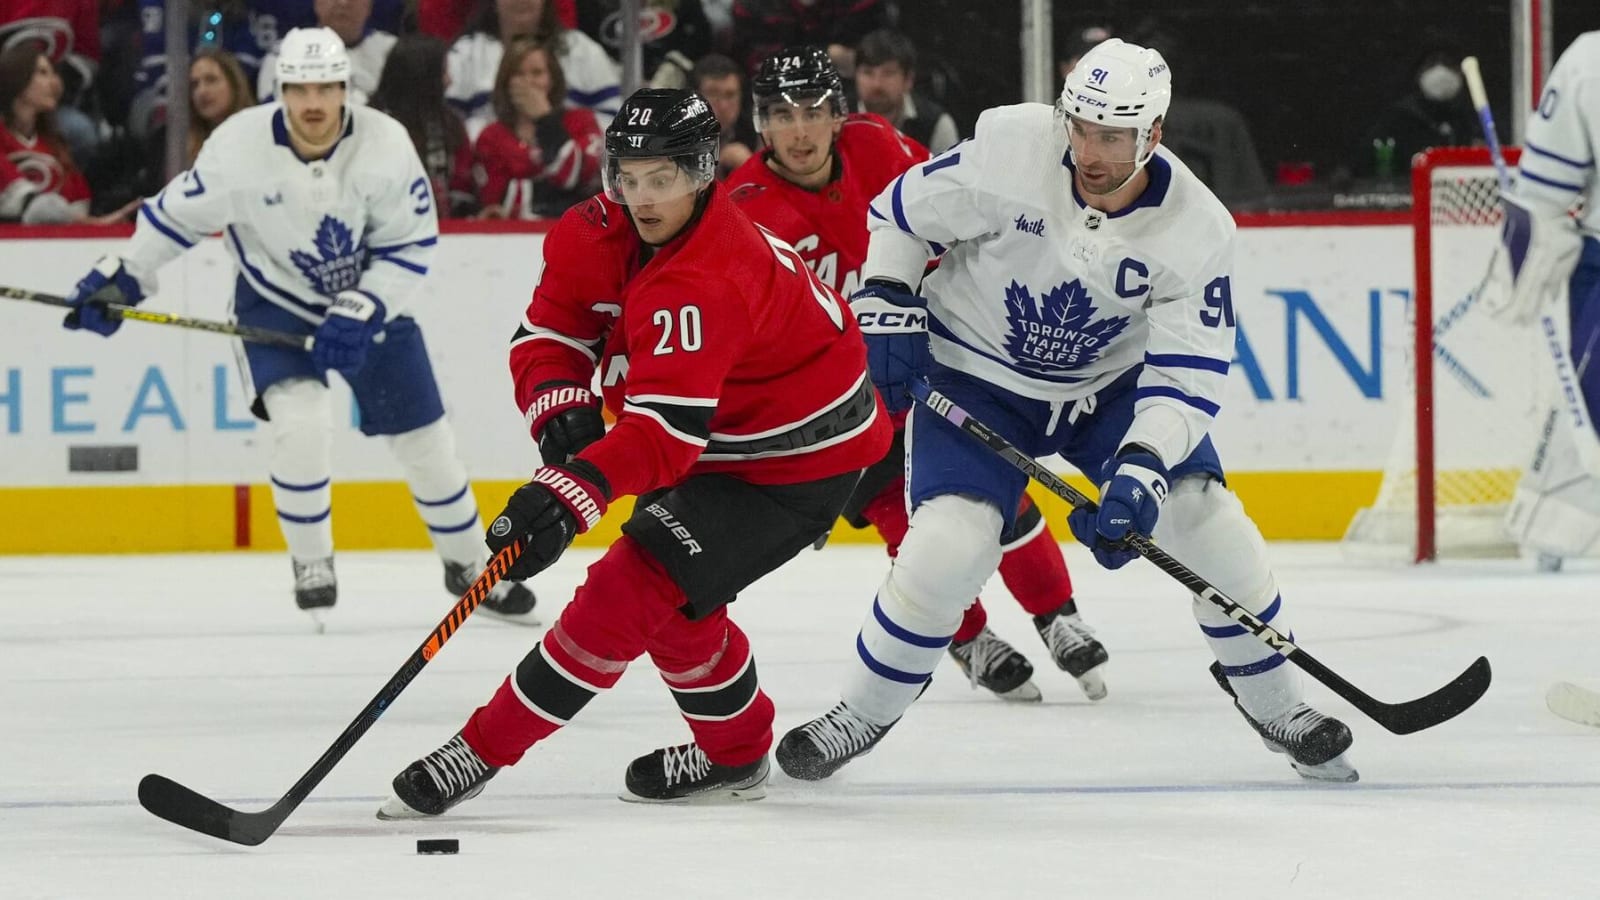 Sebastian Aho’s contract extension may have just sealed William Nylander’s fate with Maple Leafs